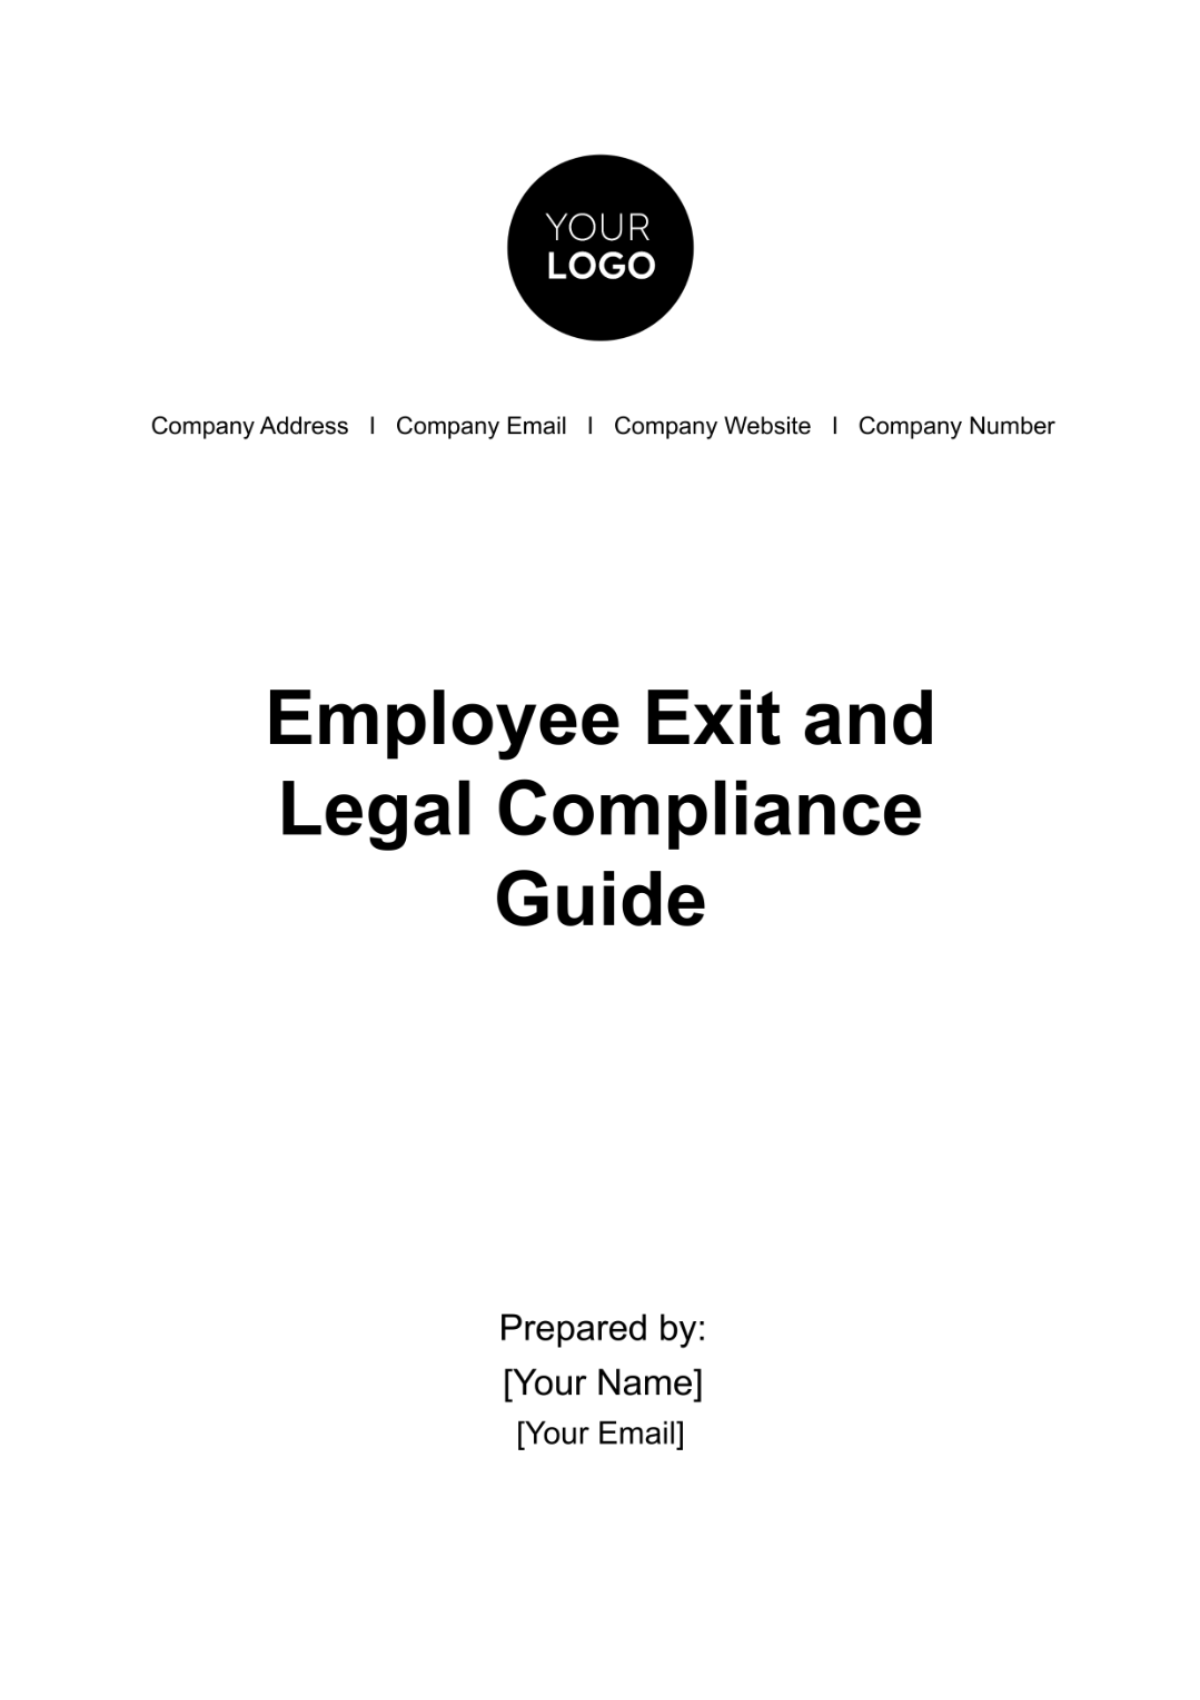 Free Employee Exit and Legal Compliance Guide HR Template